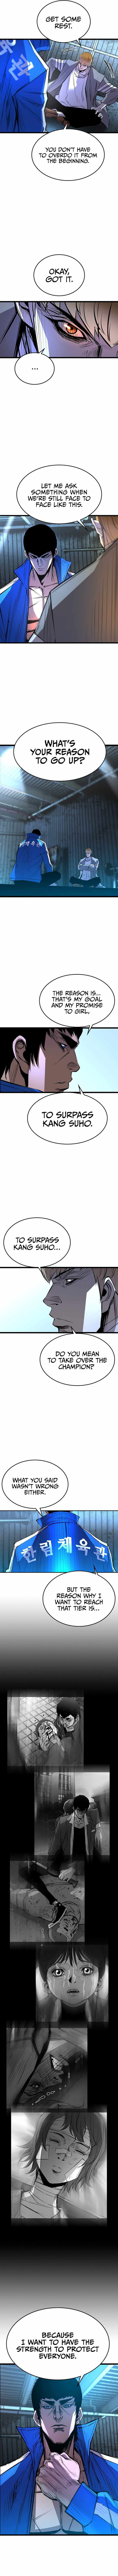 Hanlim Gym Chapter 97 page 9